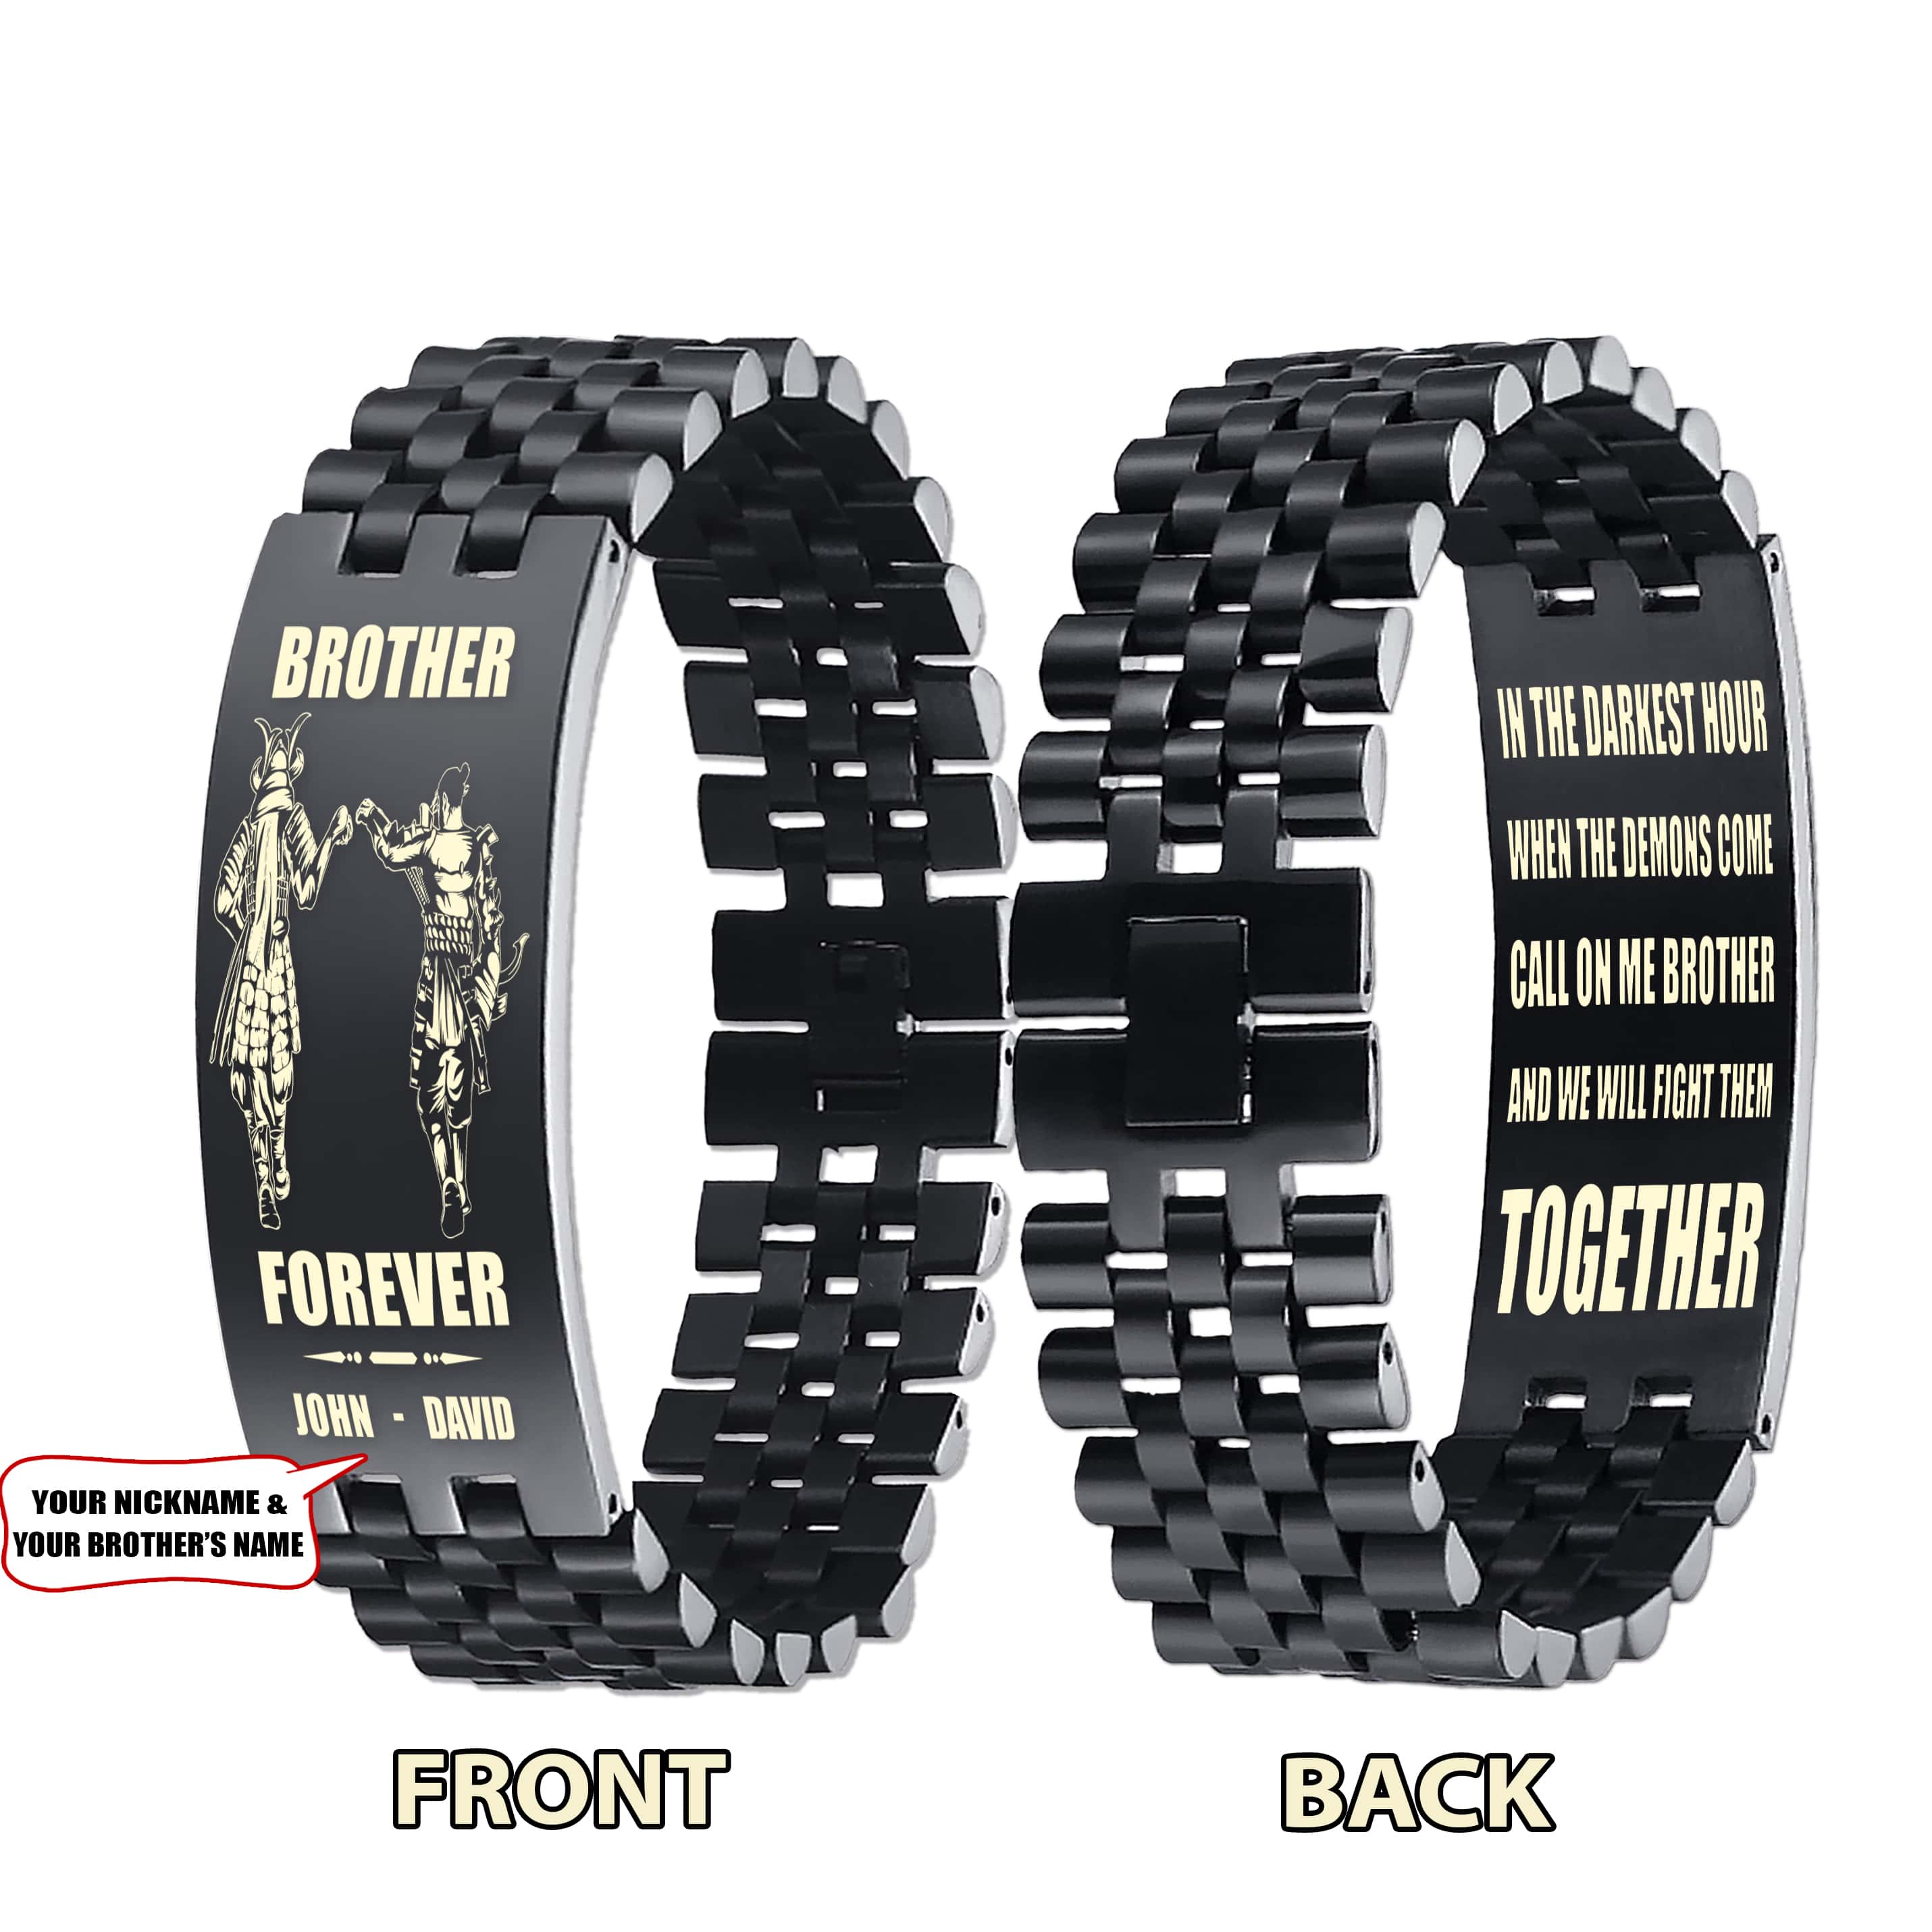 Customizable engraved brother bracelet double sided gift from brother, brother forever, in the darkest hour, When the demons come call on me brother and we will fight them together